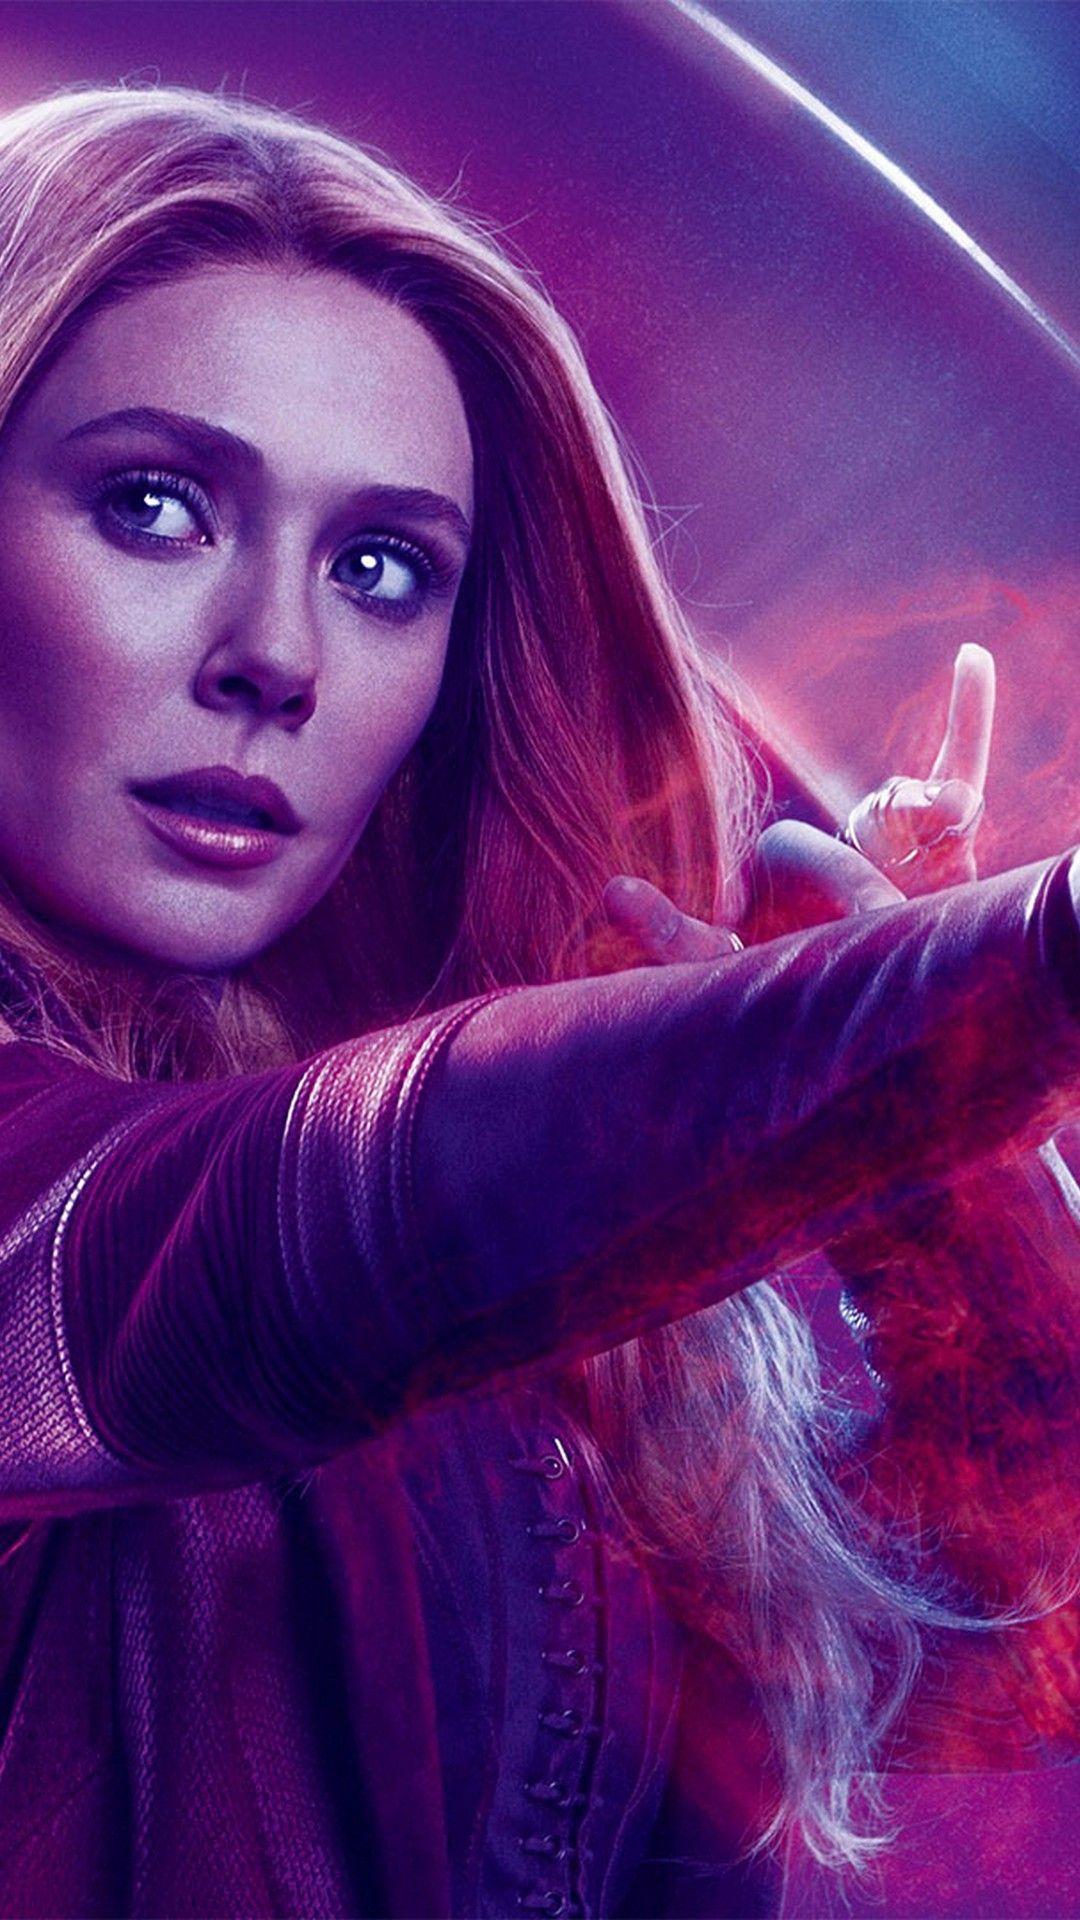 Scarlet Witch Avengers Endgame iPhone Wallpaper Movie